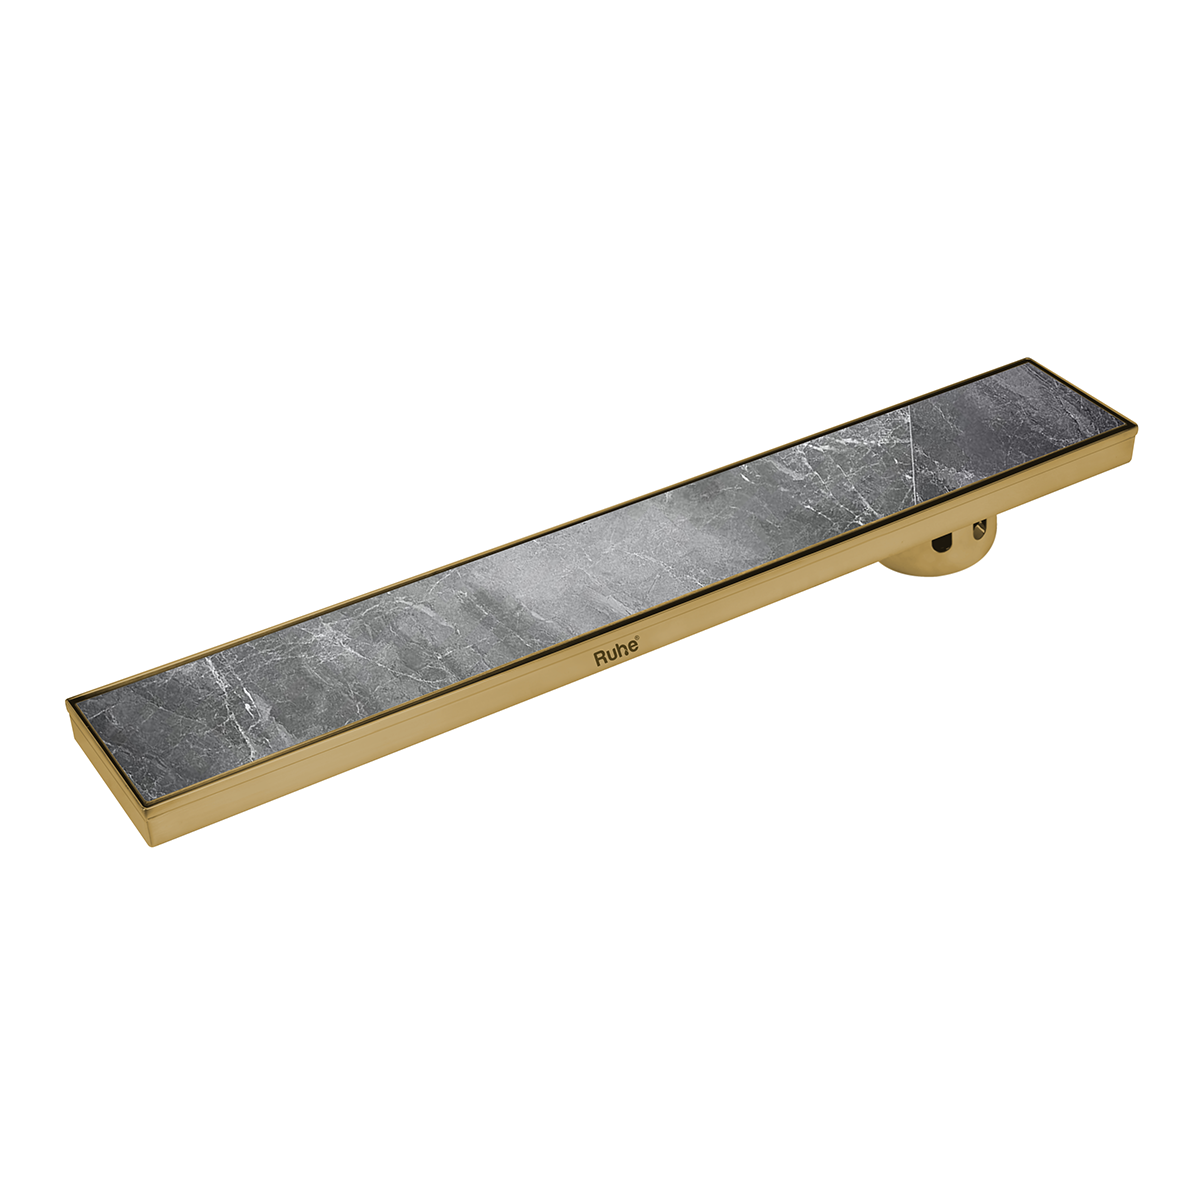 Marble Insert Shower Drain Channel (40 x 5 Inches) YELLOW GOLD PVD Coated